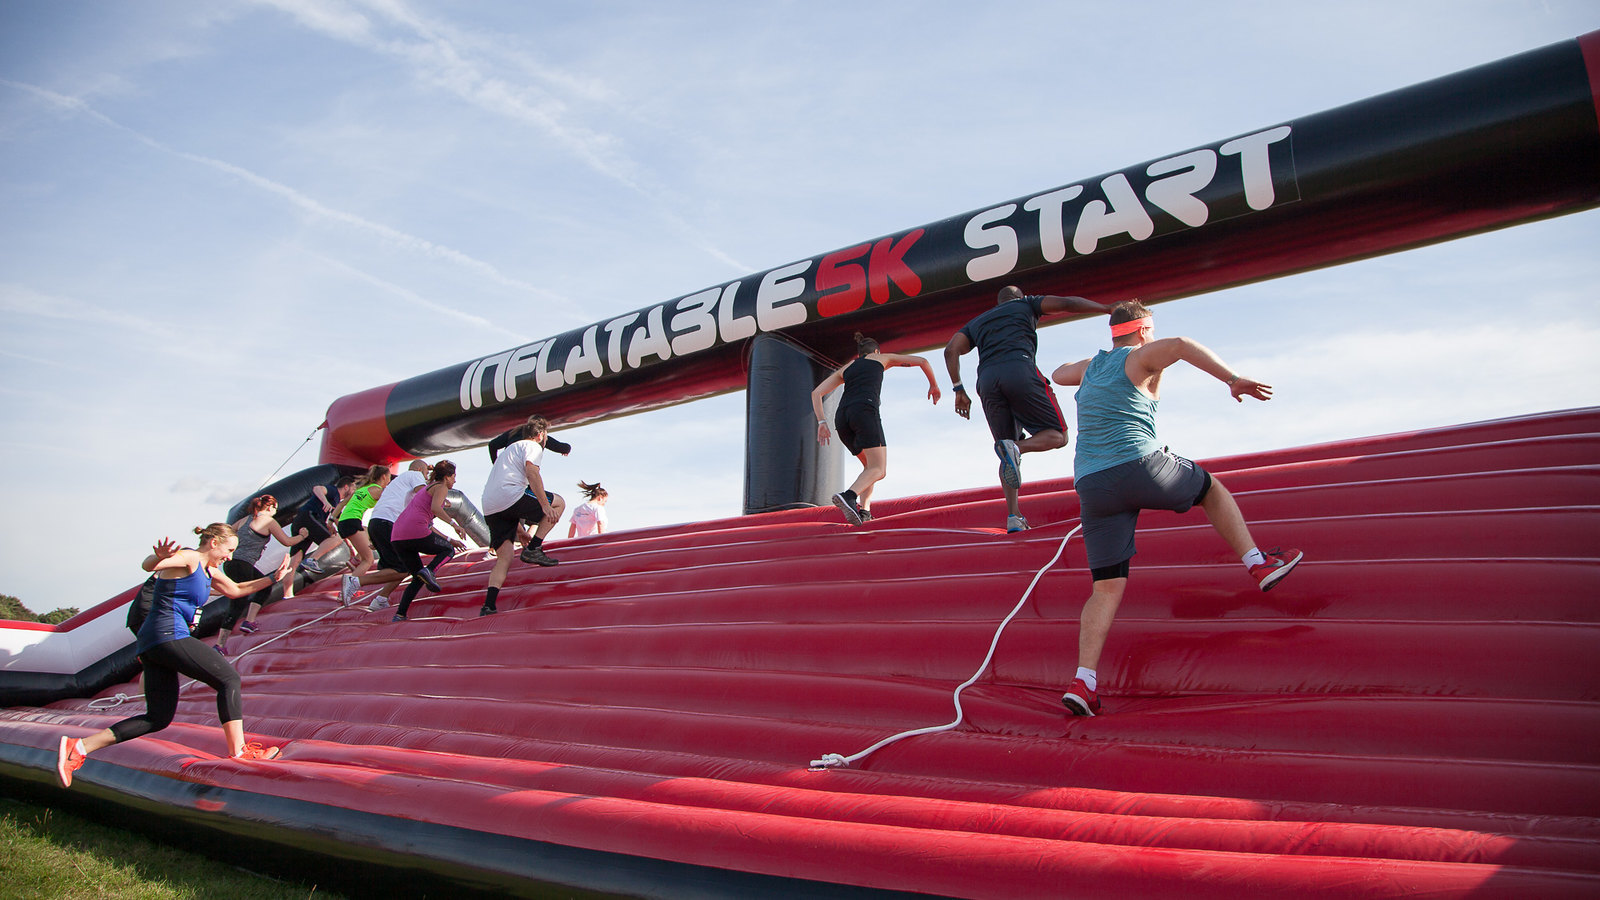 Inflatable 5k Obstacle Course Run - Bath, Somerset, Bath, Somerset, United Kingdom